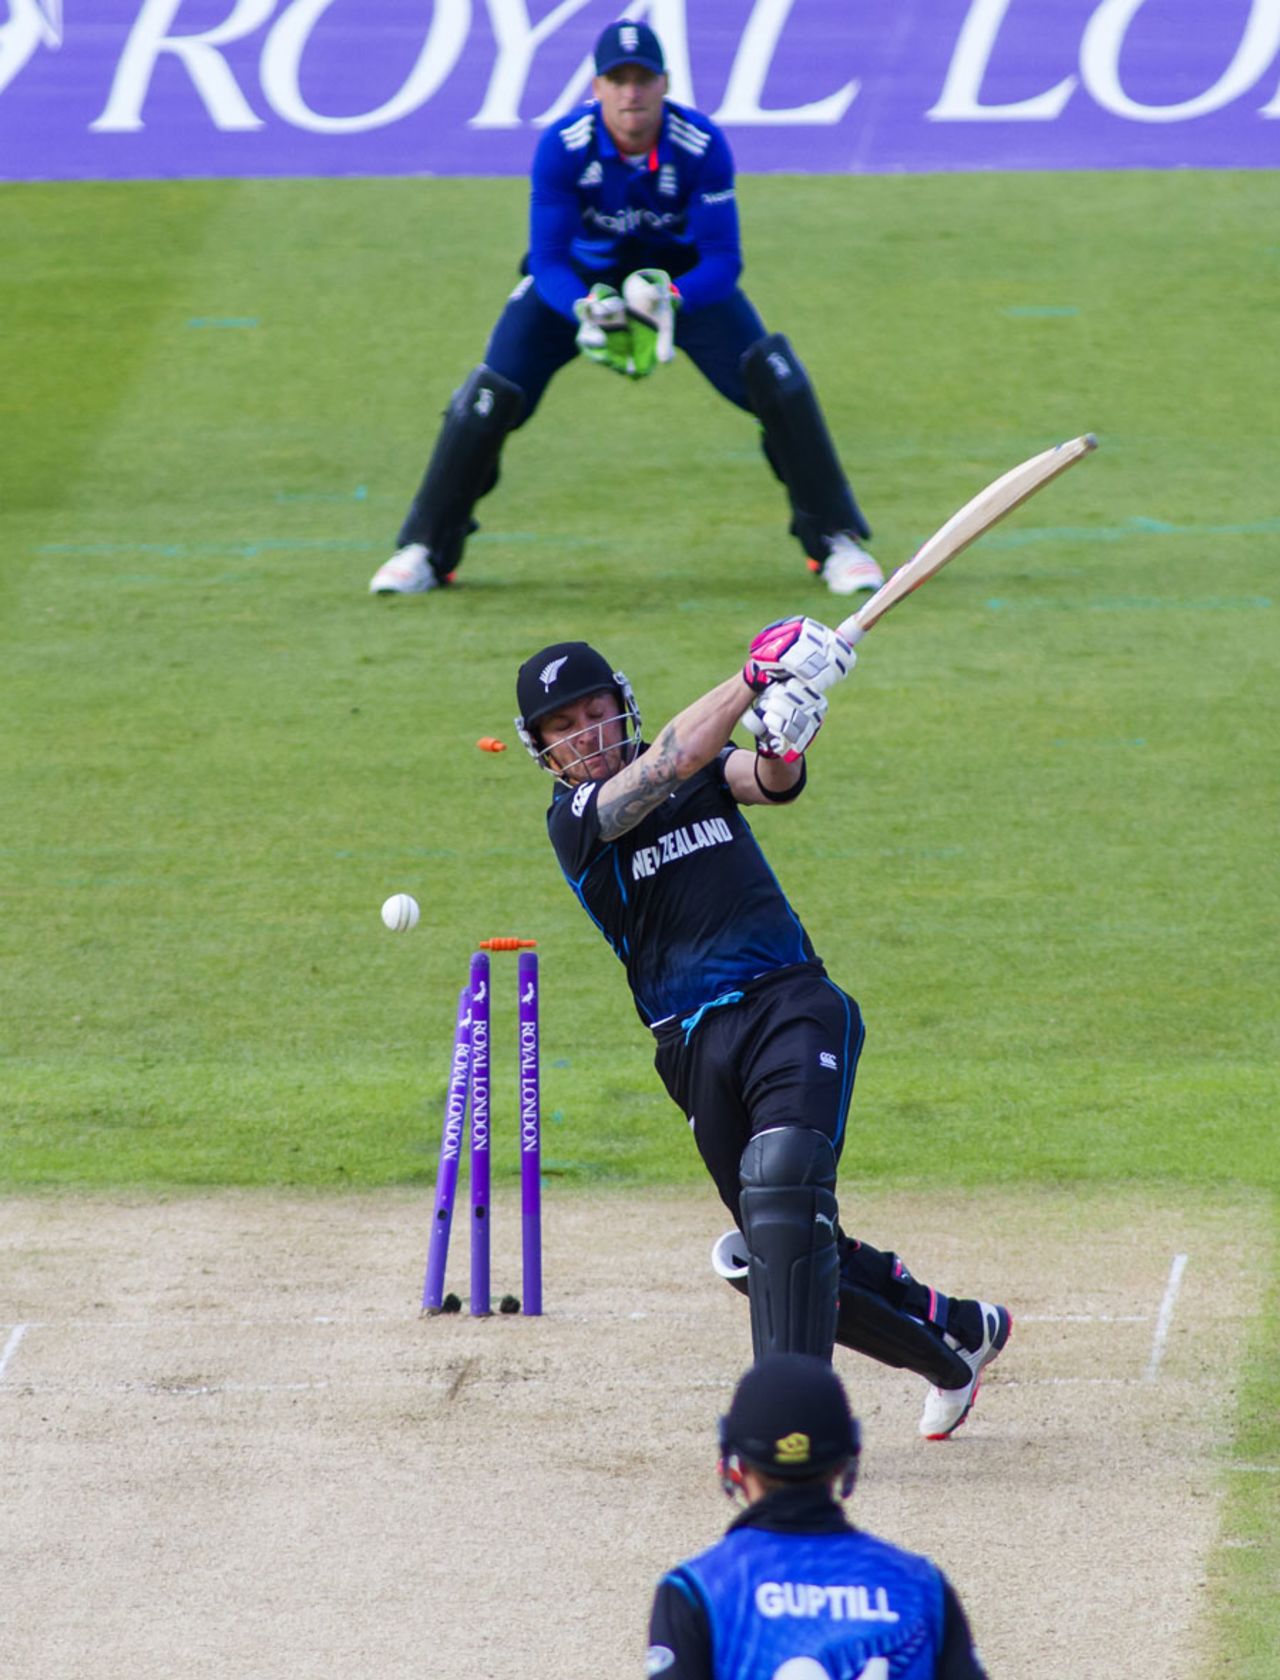 Brendon McCullum was bowled on the charge, England v New Zealand, 1st ODI, Edgbaston, June 9, 2015